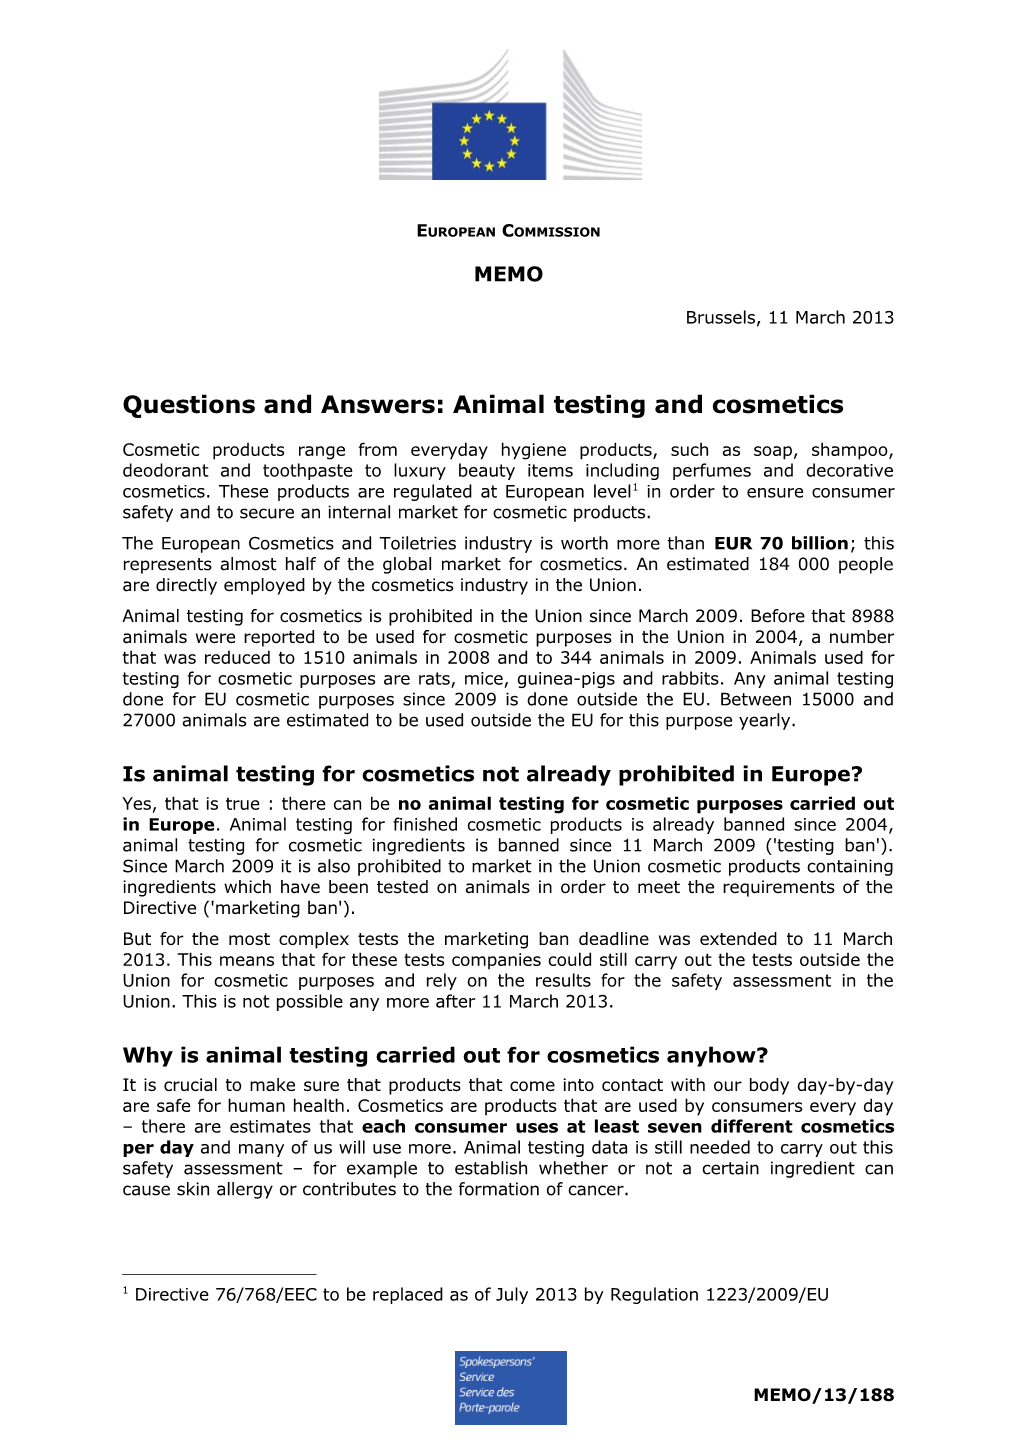 Questions and Answers: Animal Testing and Cosmetics